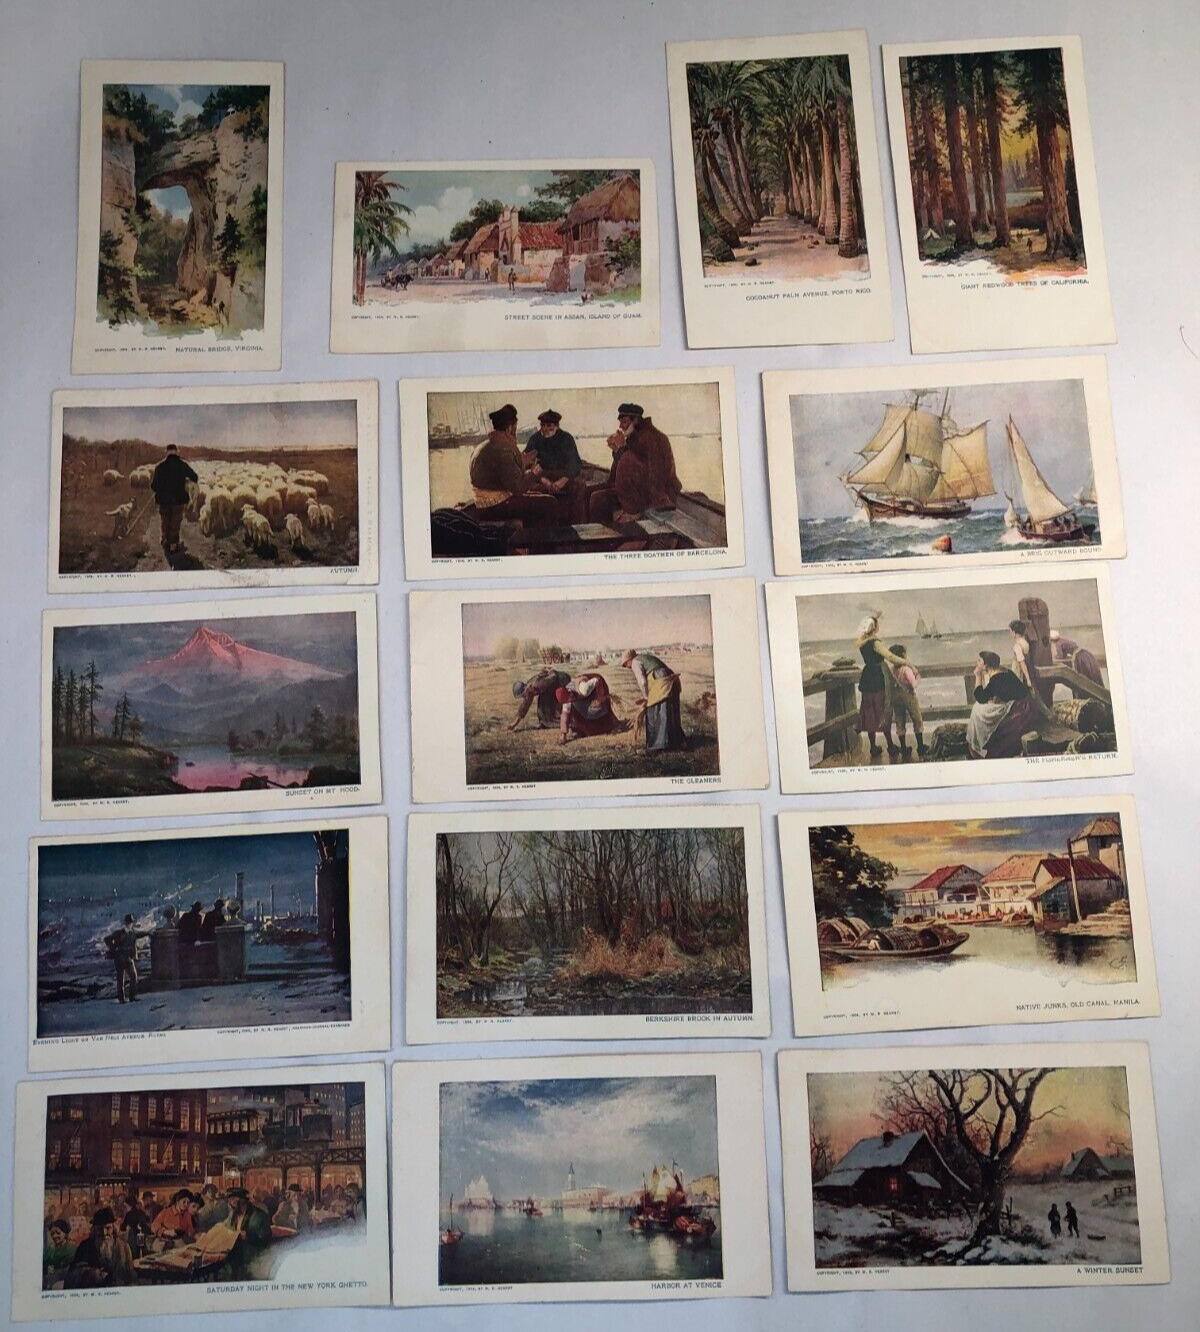 1904 W.R. Hearst Postcard Lot of 16 Assorted Not Posted Unused Vintage Antique